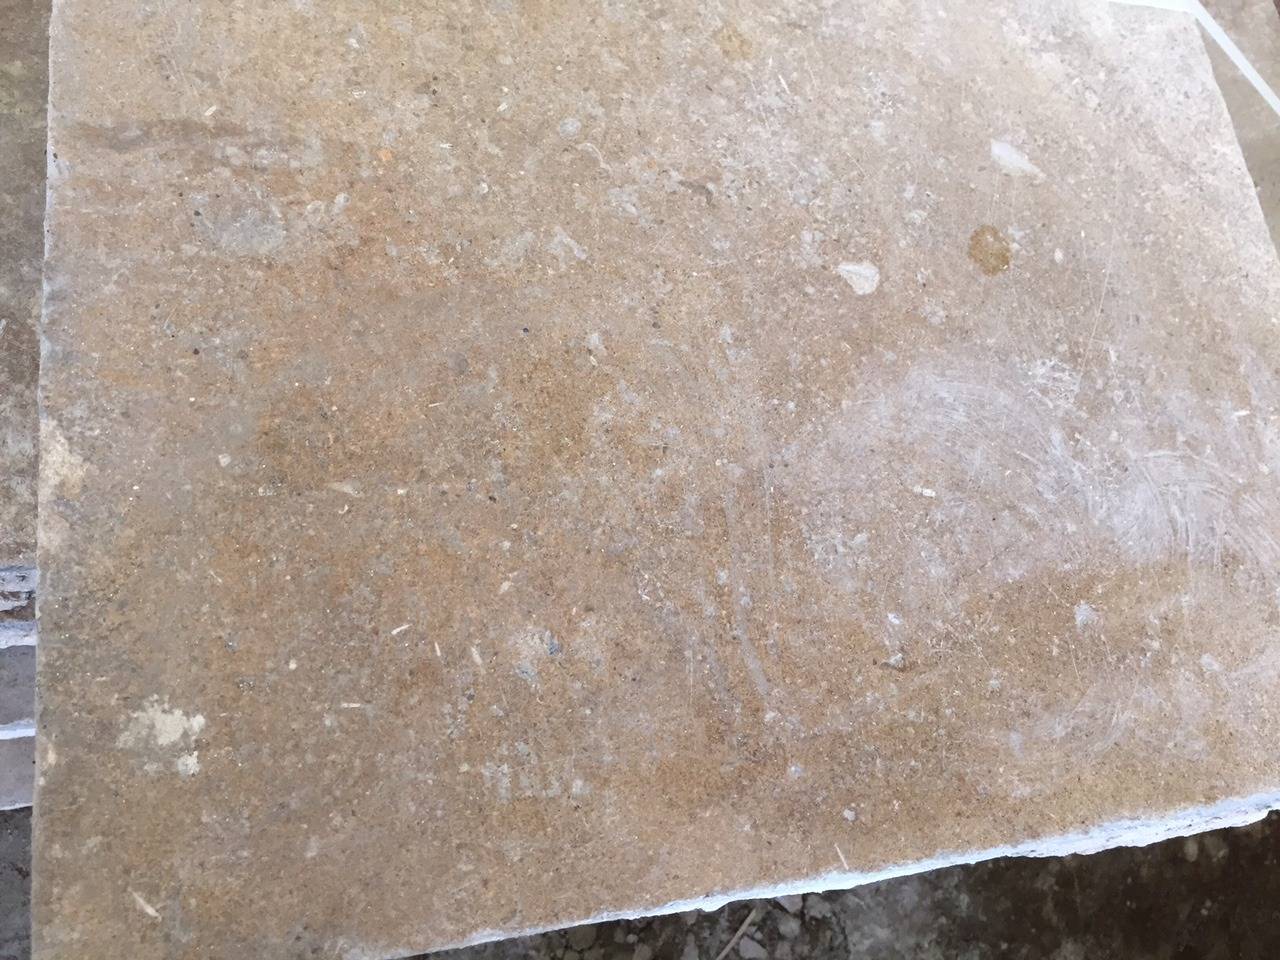 Original French antique solid limestone Dalles de Bourgogne 17th century.
Very unique and rare. In excellent condition, ready for installation.
We have a very large selection and top of the line quality-price-services.

We can cut the original